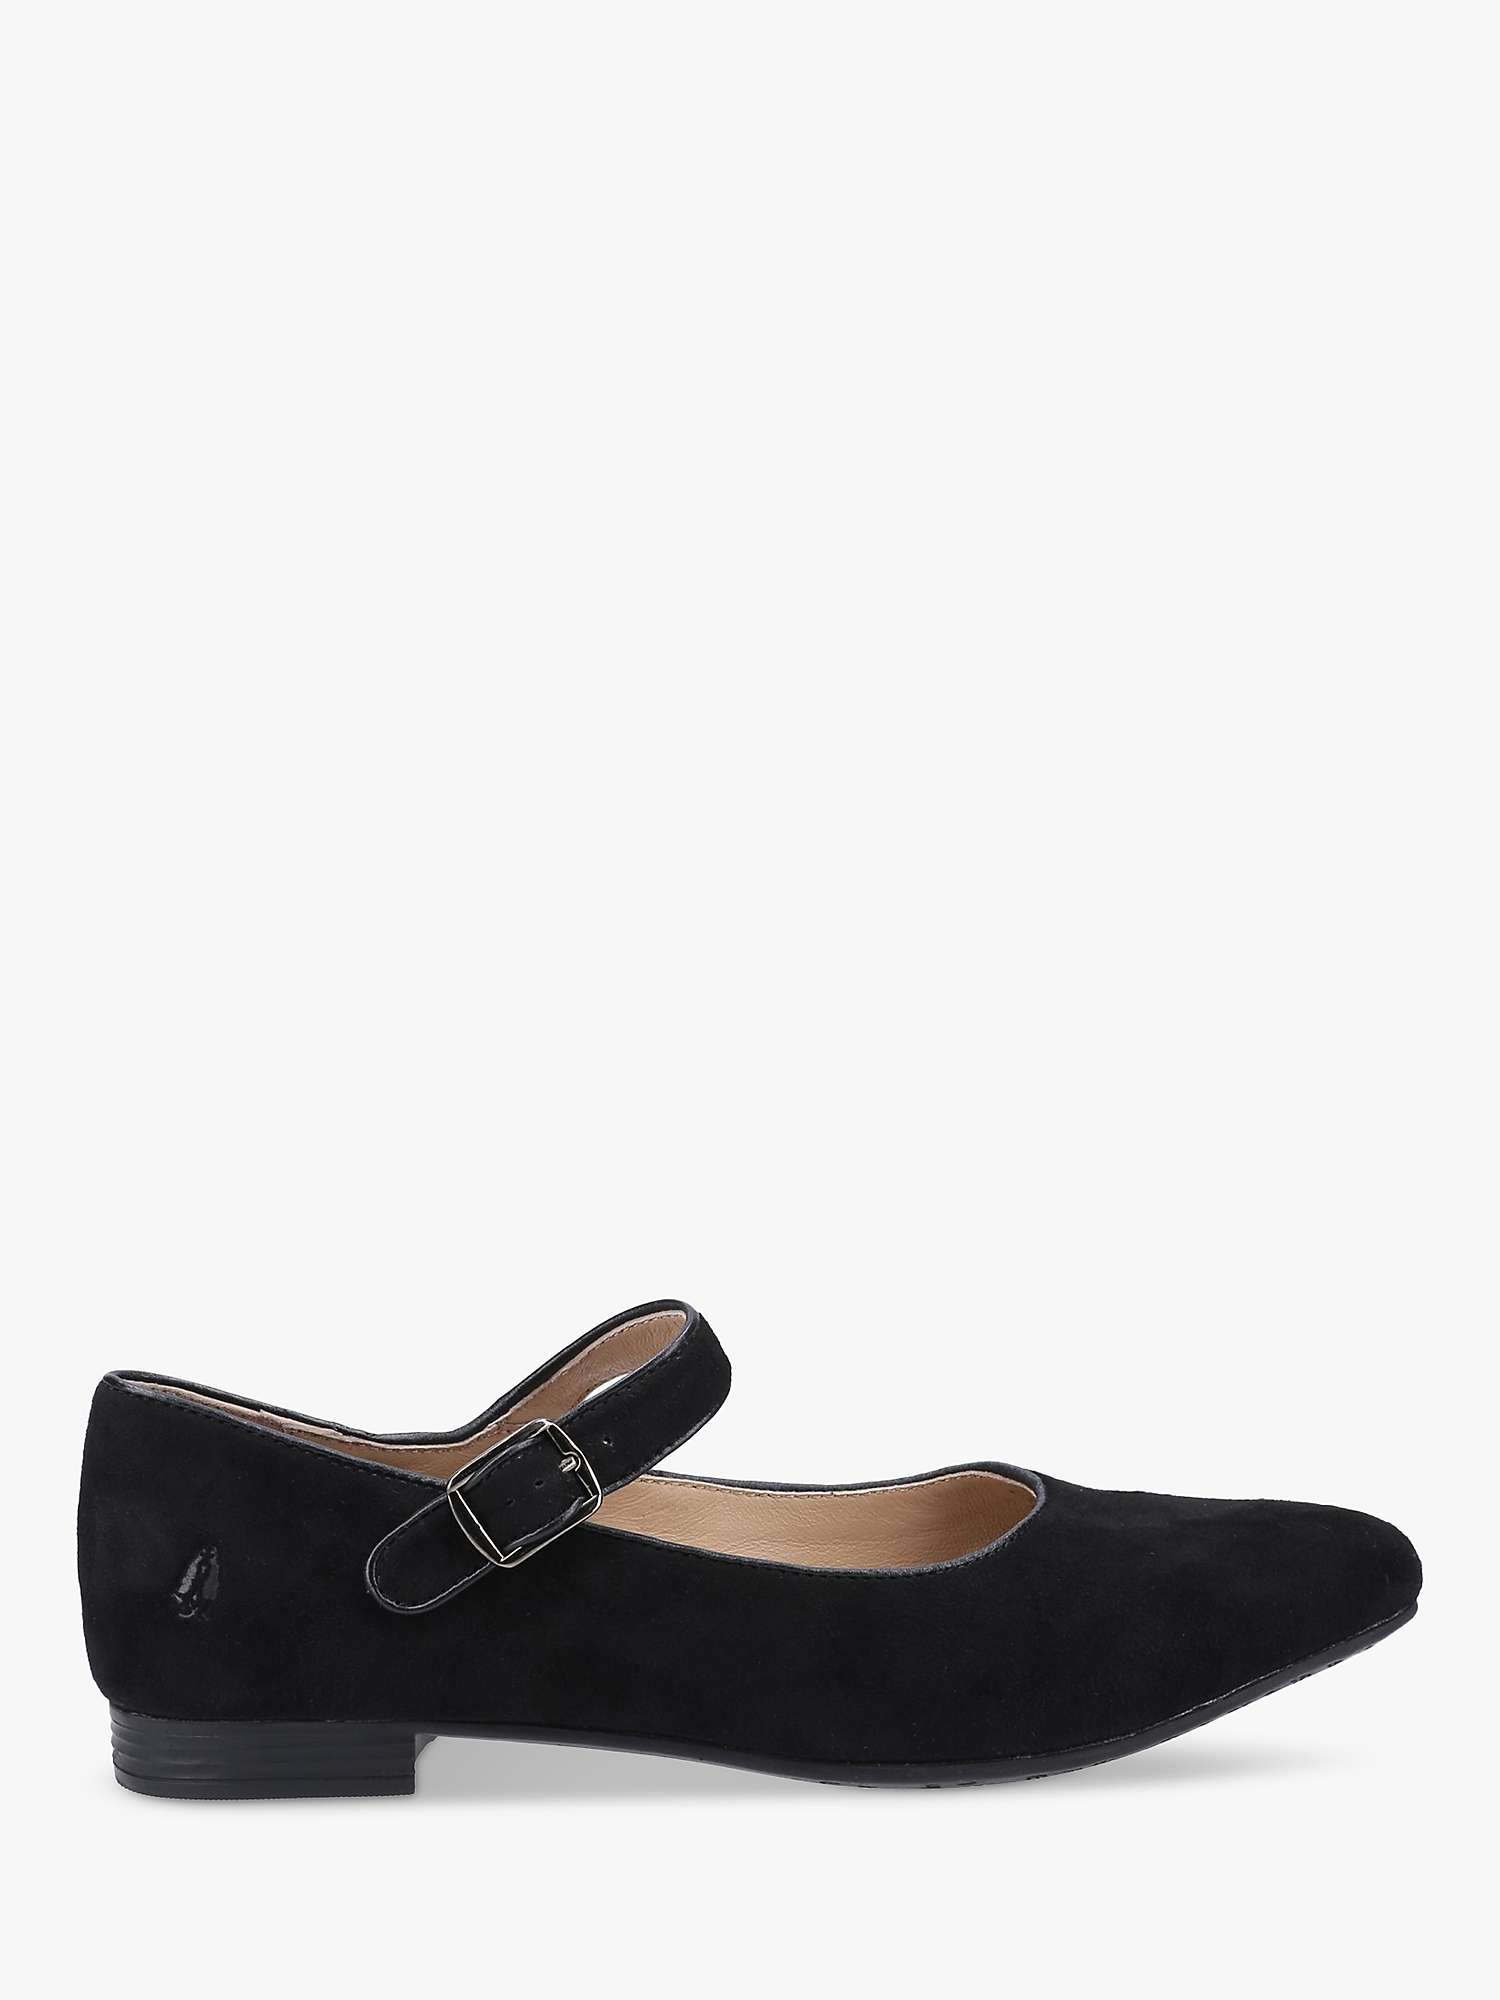 Buy Melissa Suede Strap Mary Jane Shoes, Black Online at johnlewis.com